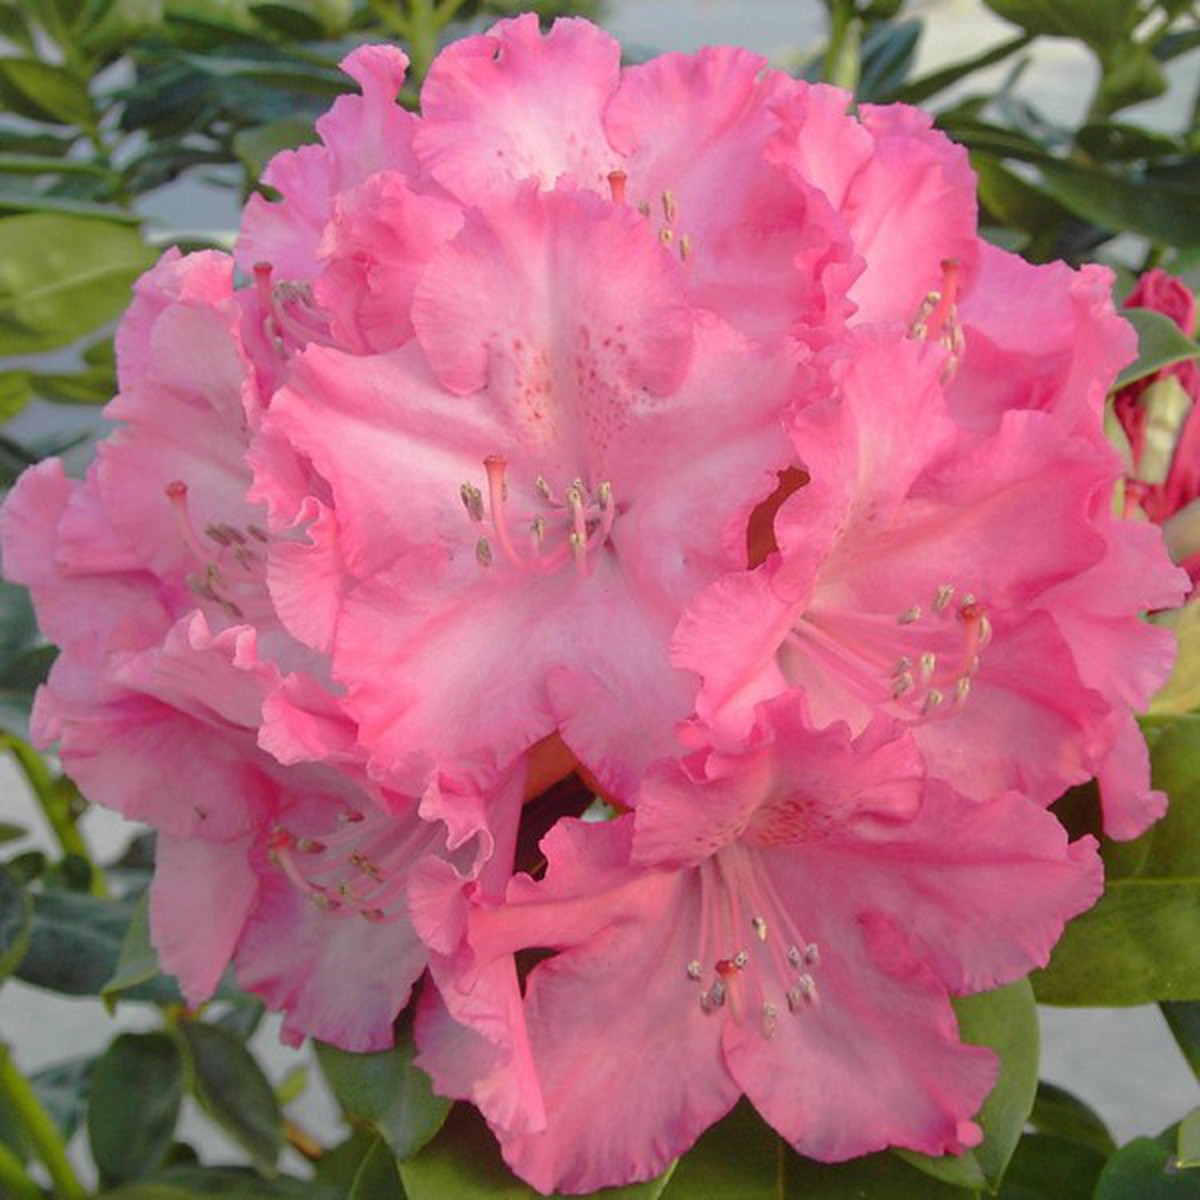   Rhododendron 'Germania'  C15 70/+